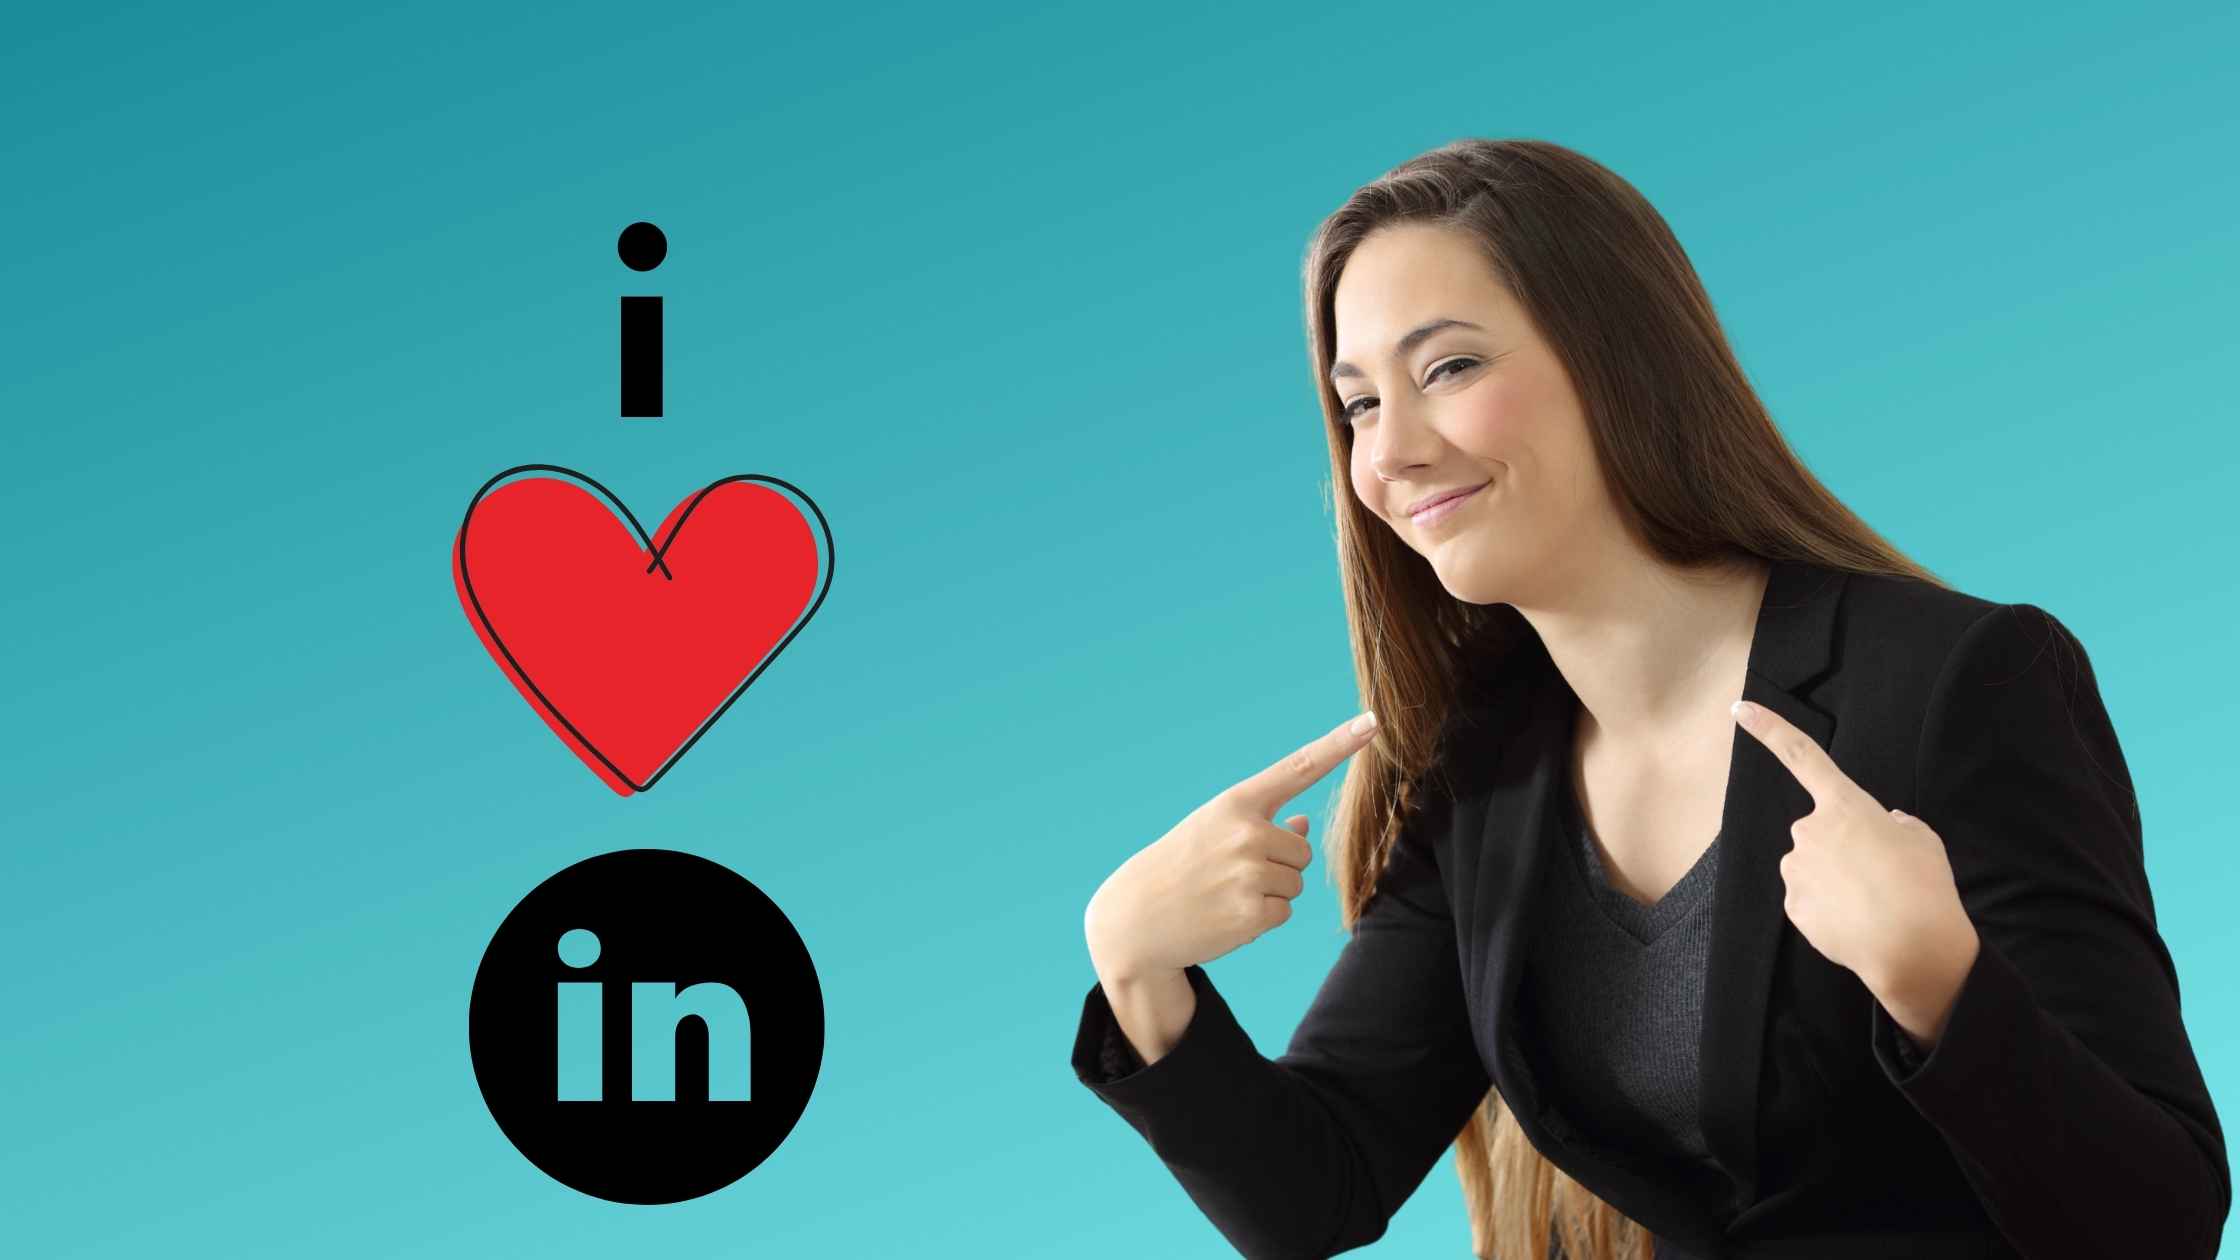 How to make your LinkedIn profile stand out